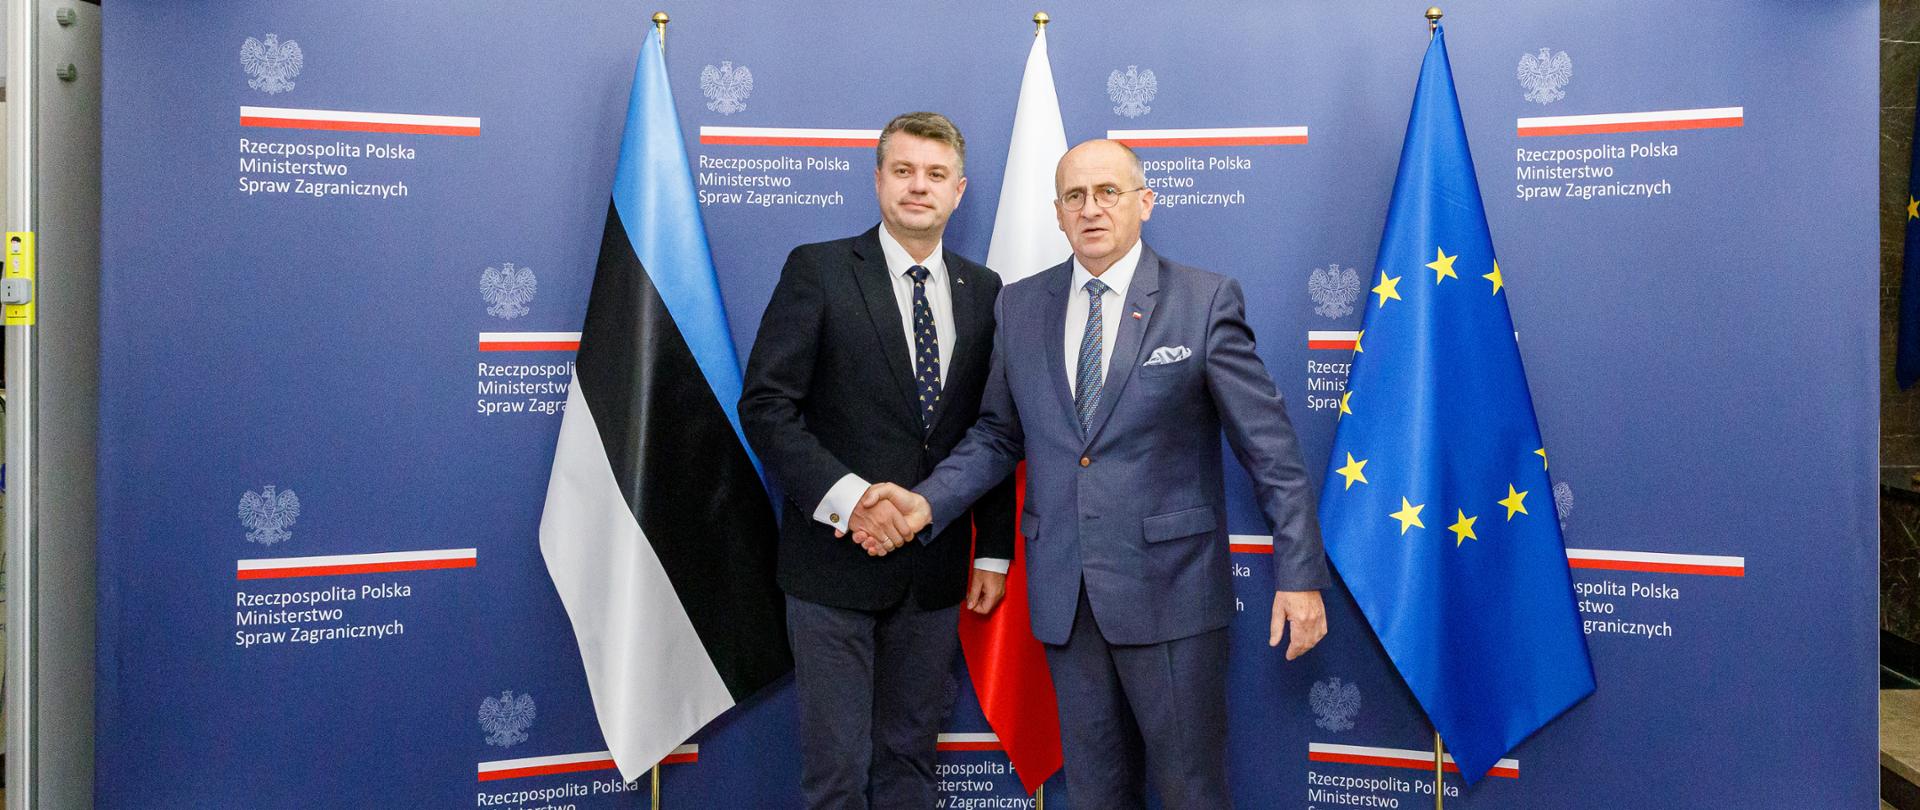 Meeting of foreign ministers Urmas Reinsalu and Zbigniew Rau in Warsaw